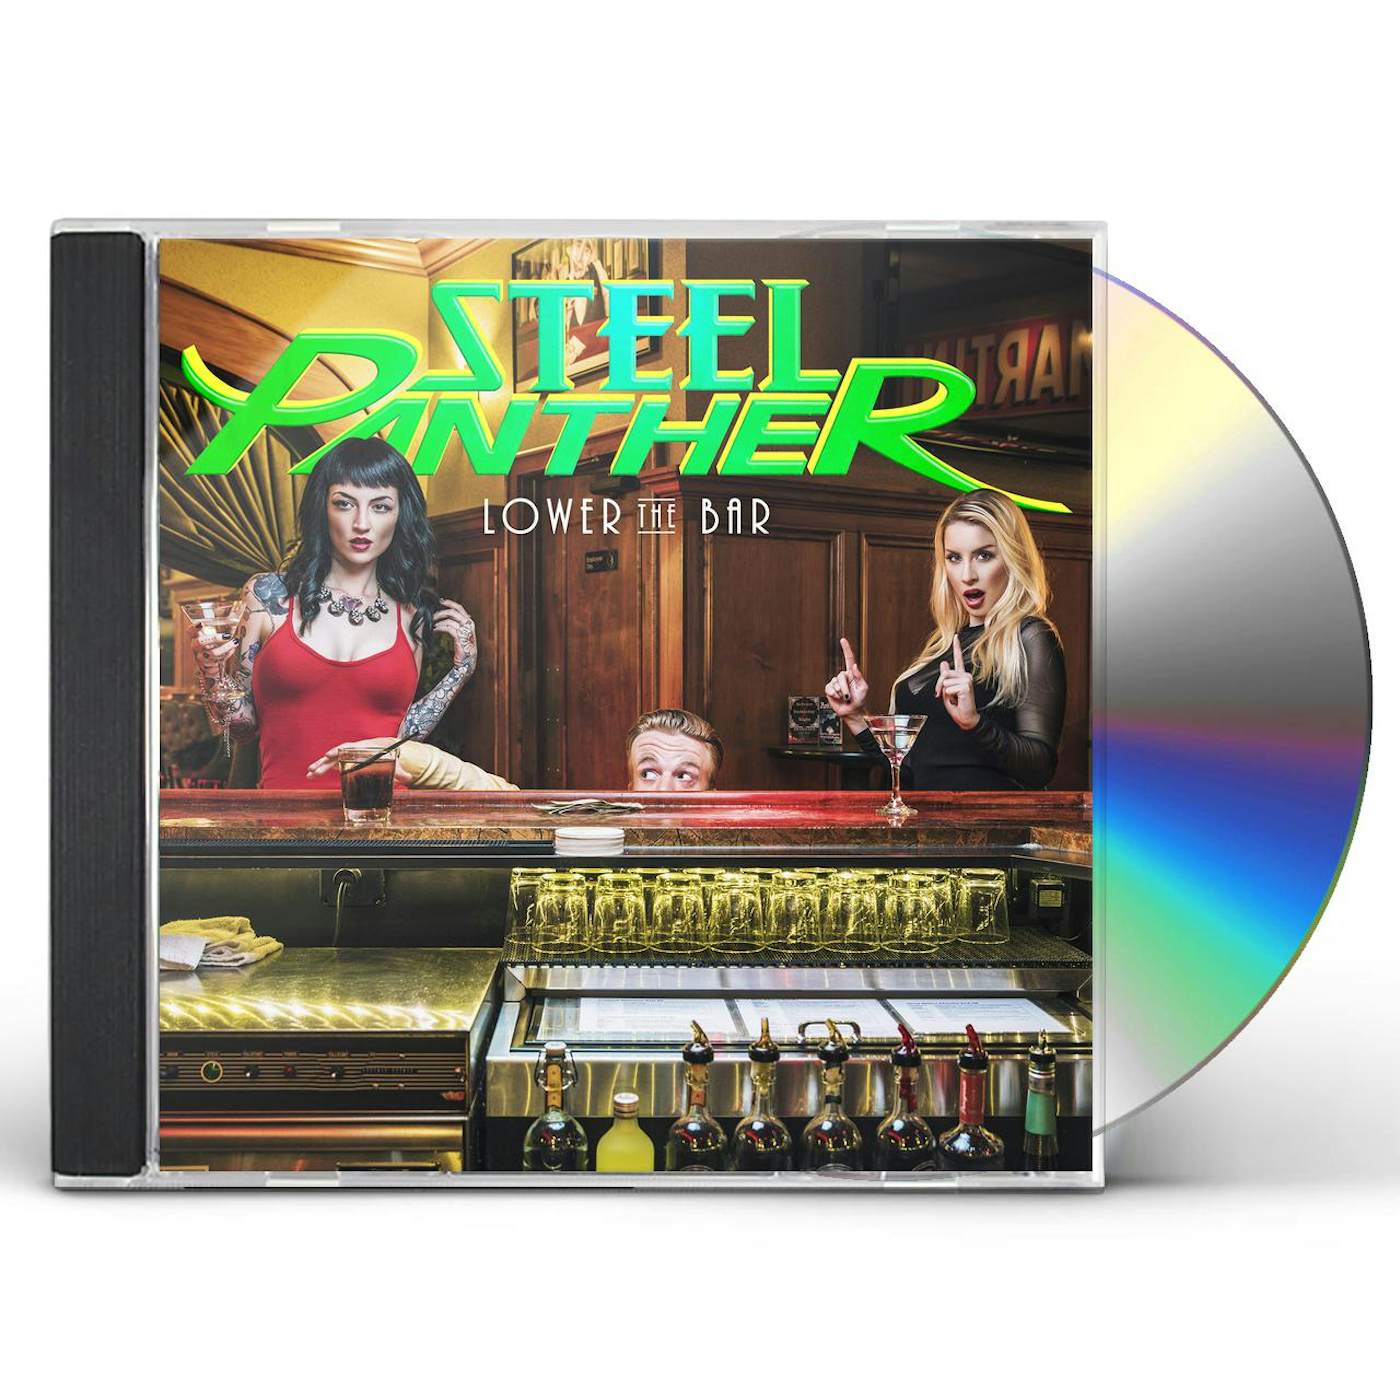 Steel Panther LOWER THE BAR CD